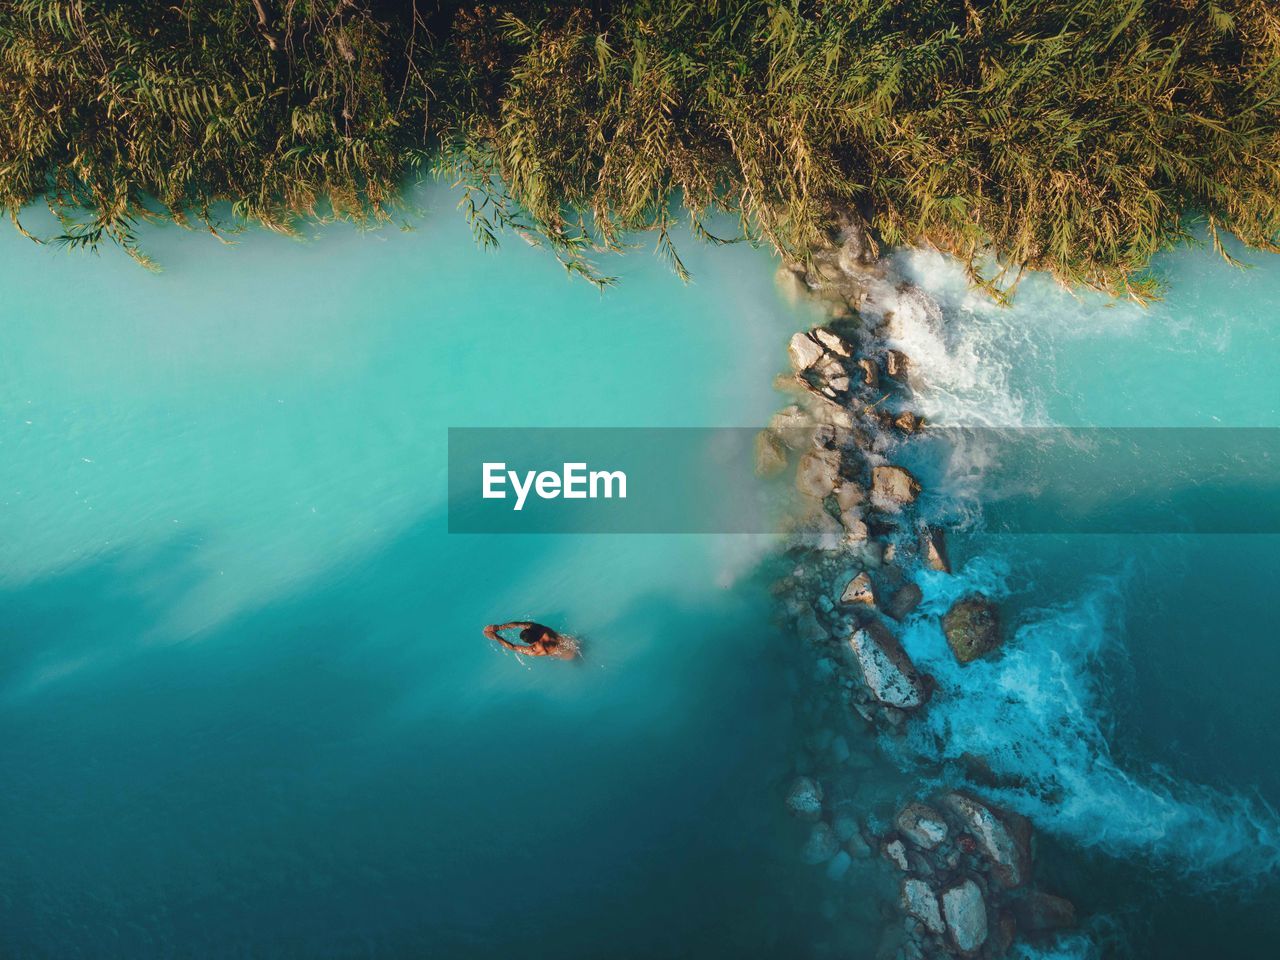 Aerial drone view of man swimming in tropical blue hot springs river